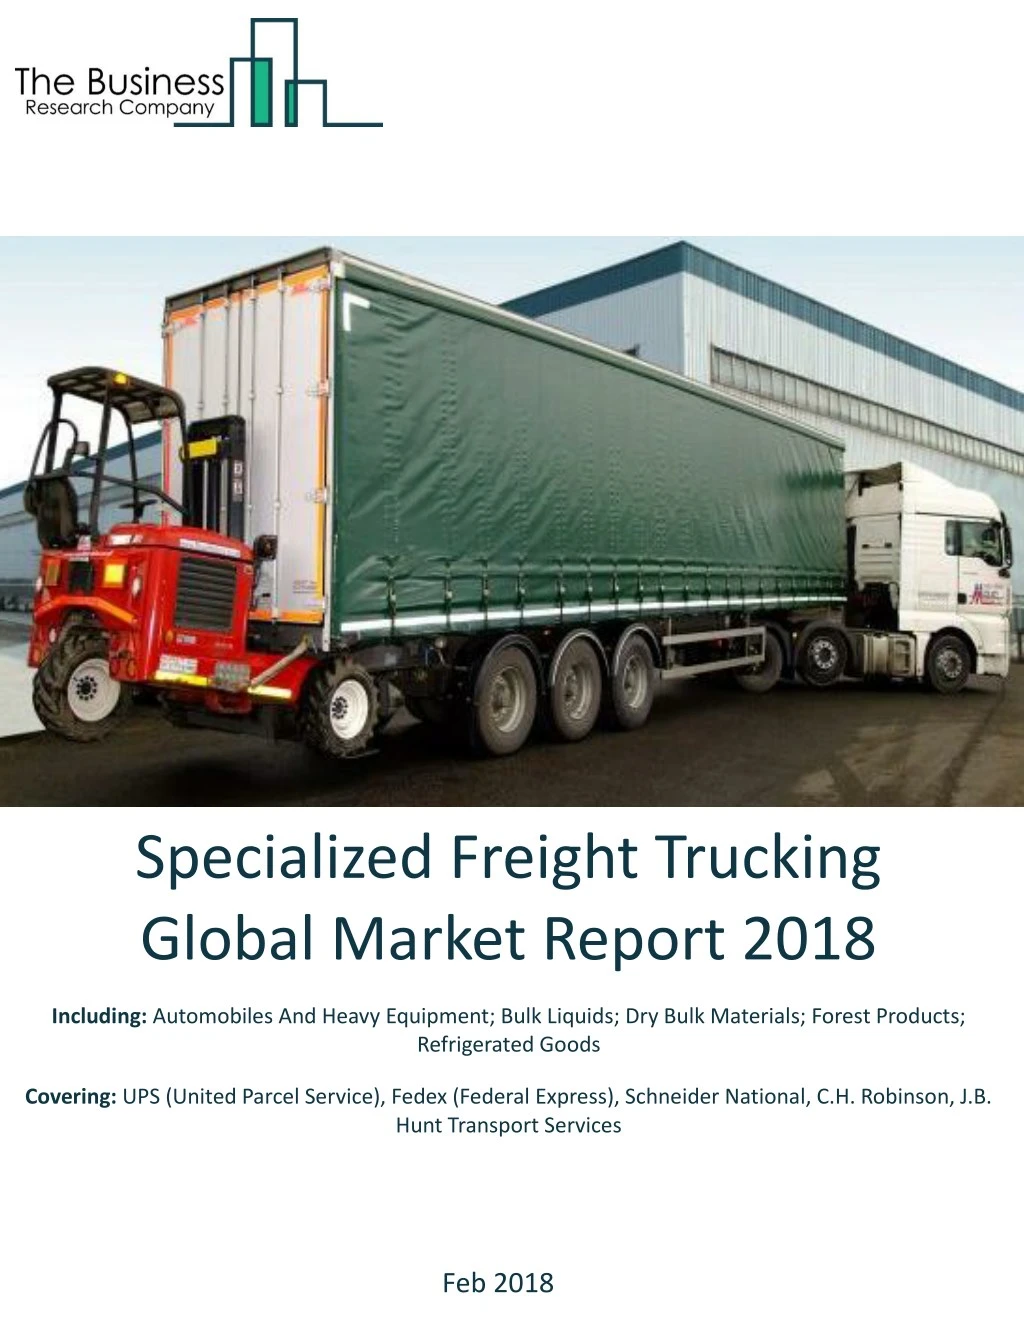 specialized freight trucking global market report